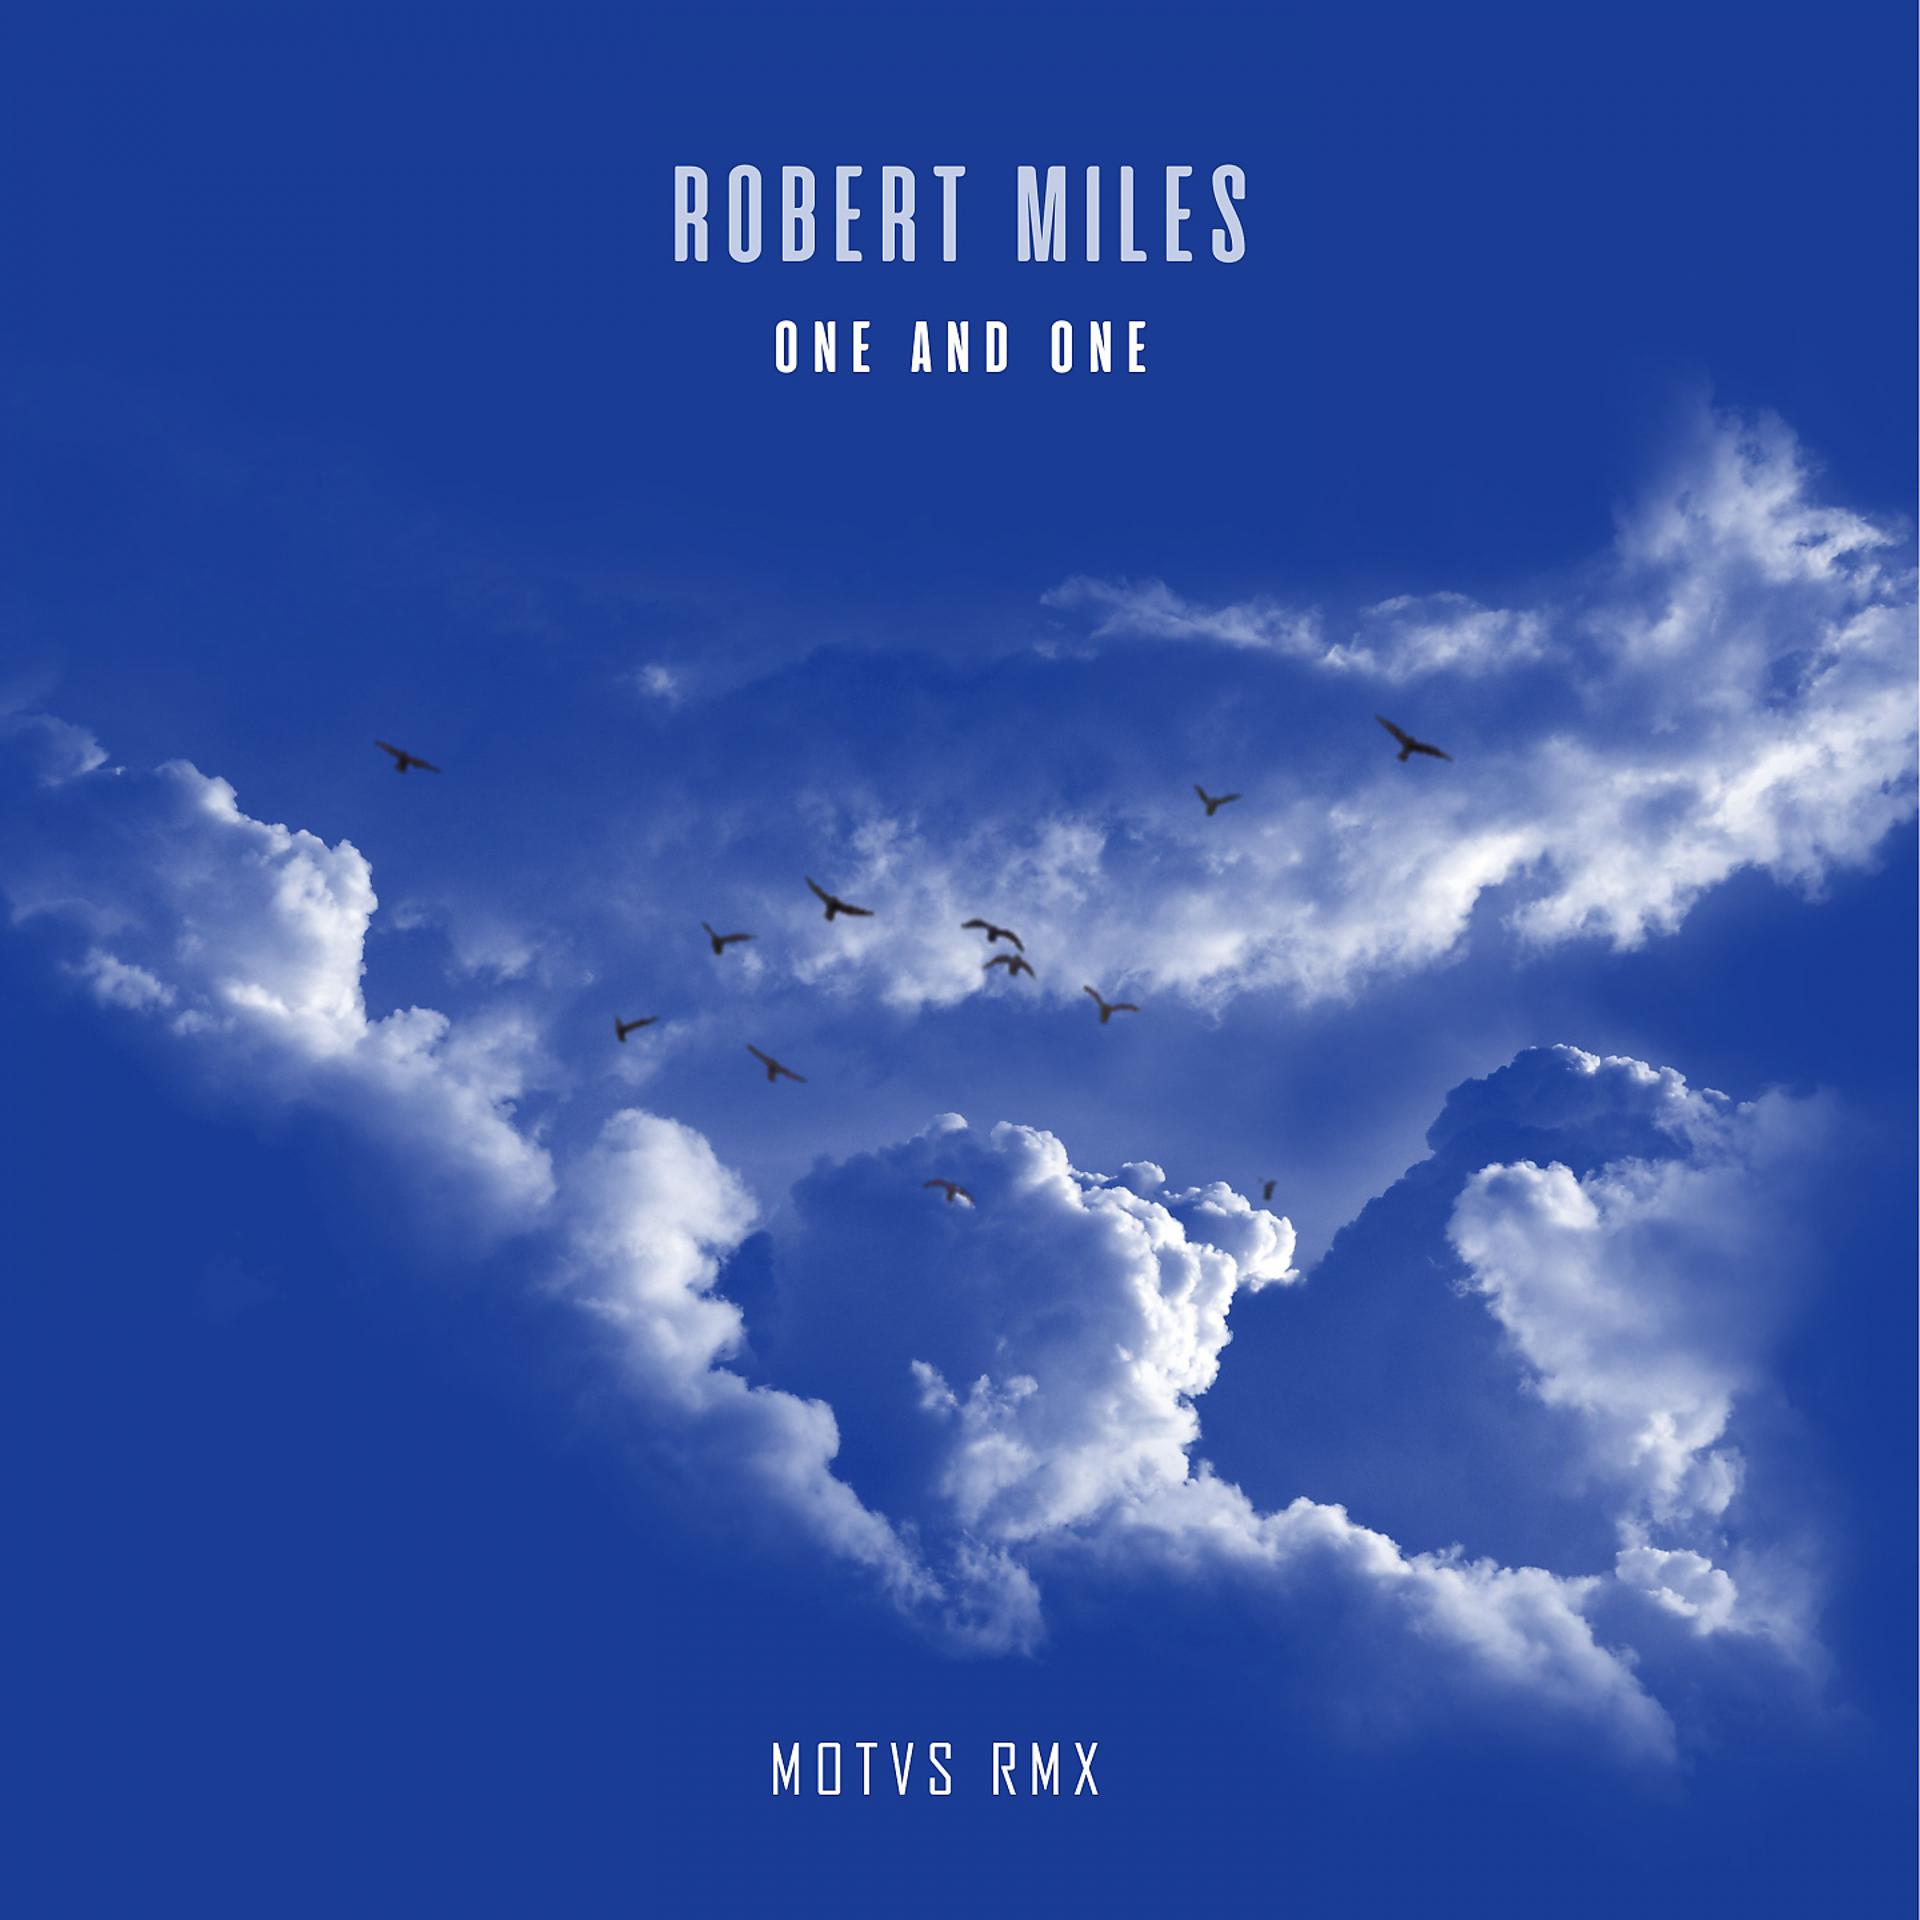 R miles. Robert Miles one and one. Robert Miles - Dreamland. Robert Miles - one and one (MOTVS. Robert Miles альбомы.